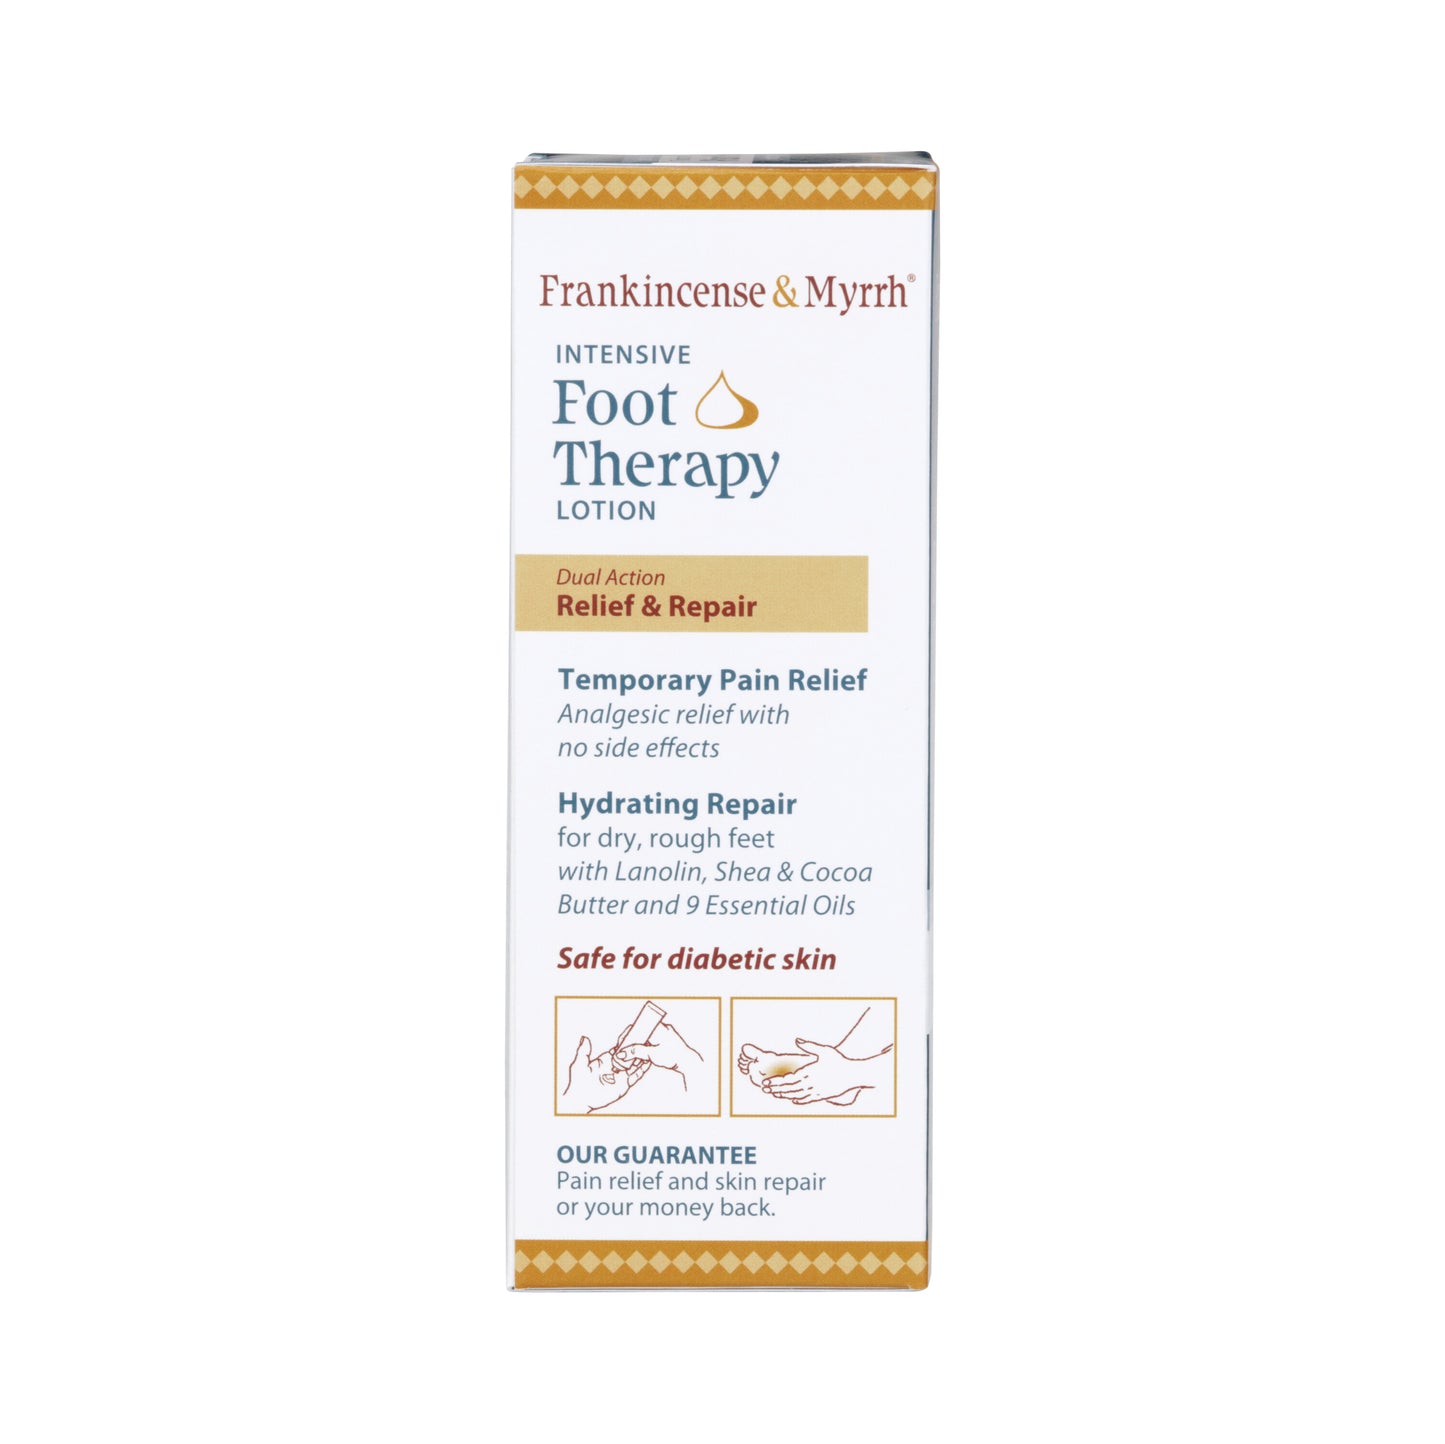 Frankincense & Myrrh Intensive Foot Therapy Lotion